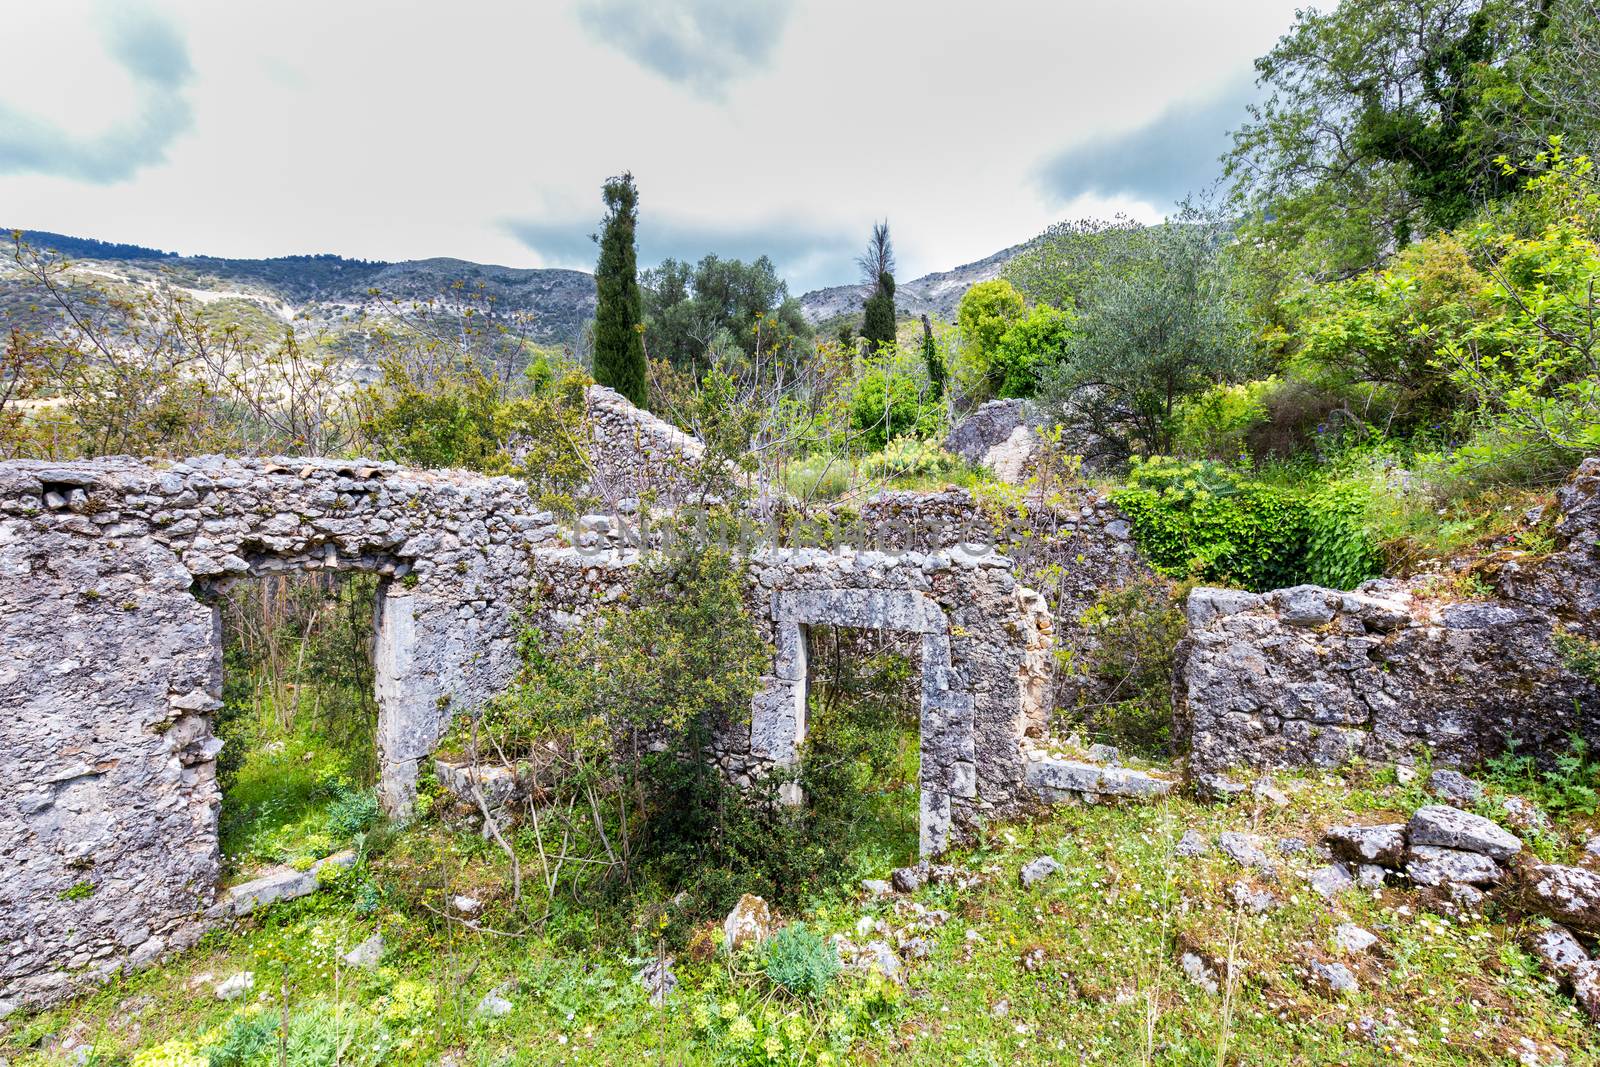 Old historic walls as ruins in landscape of Greece by BenSchonewille